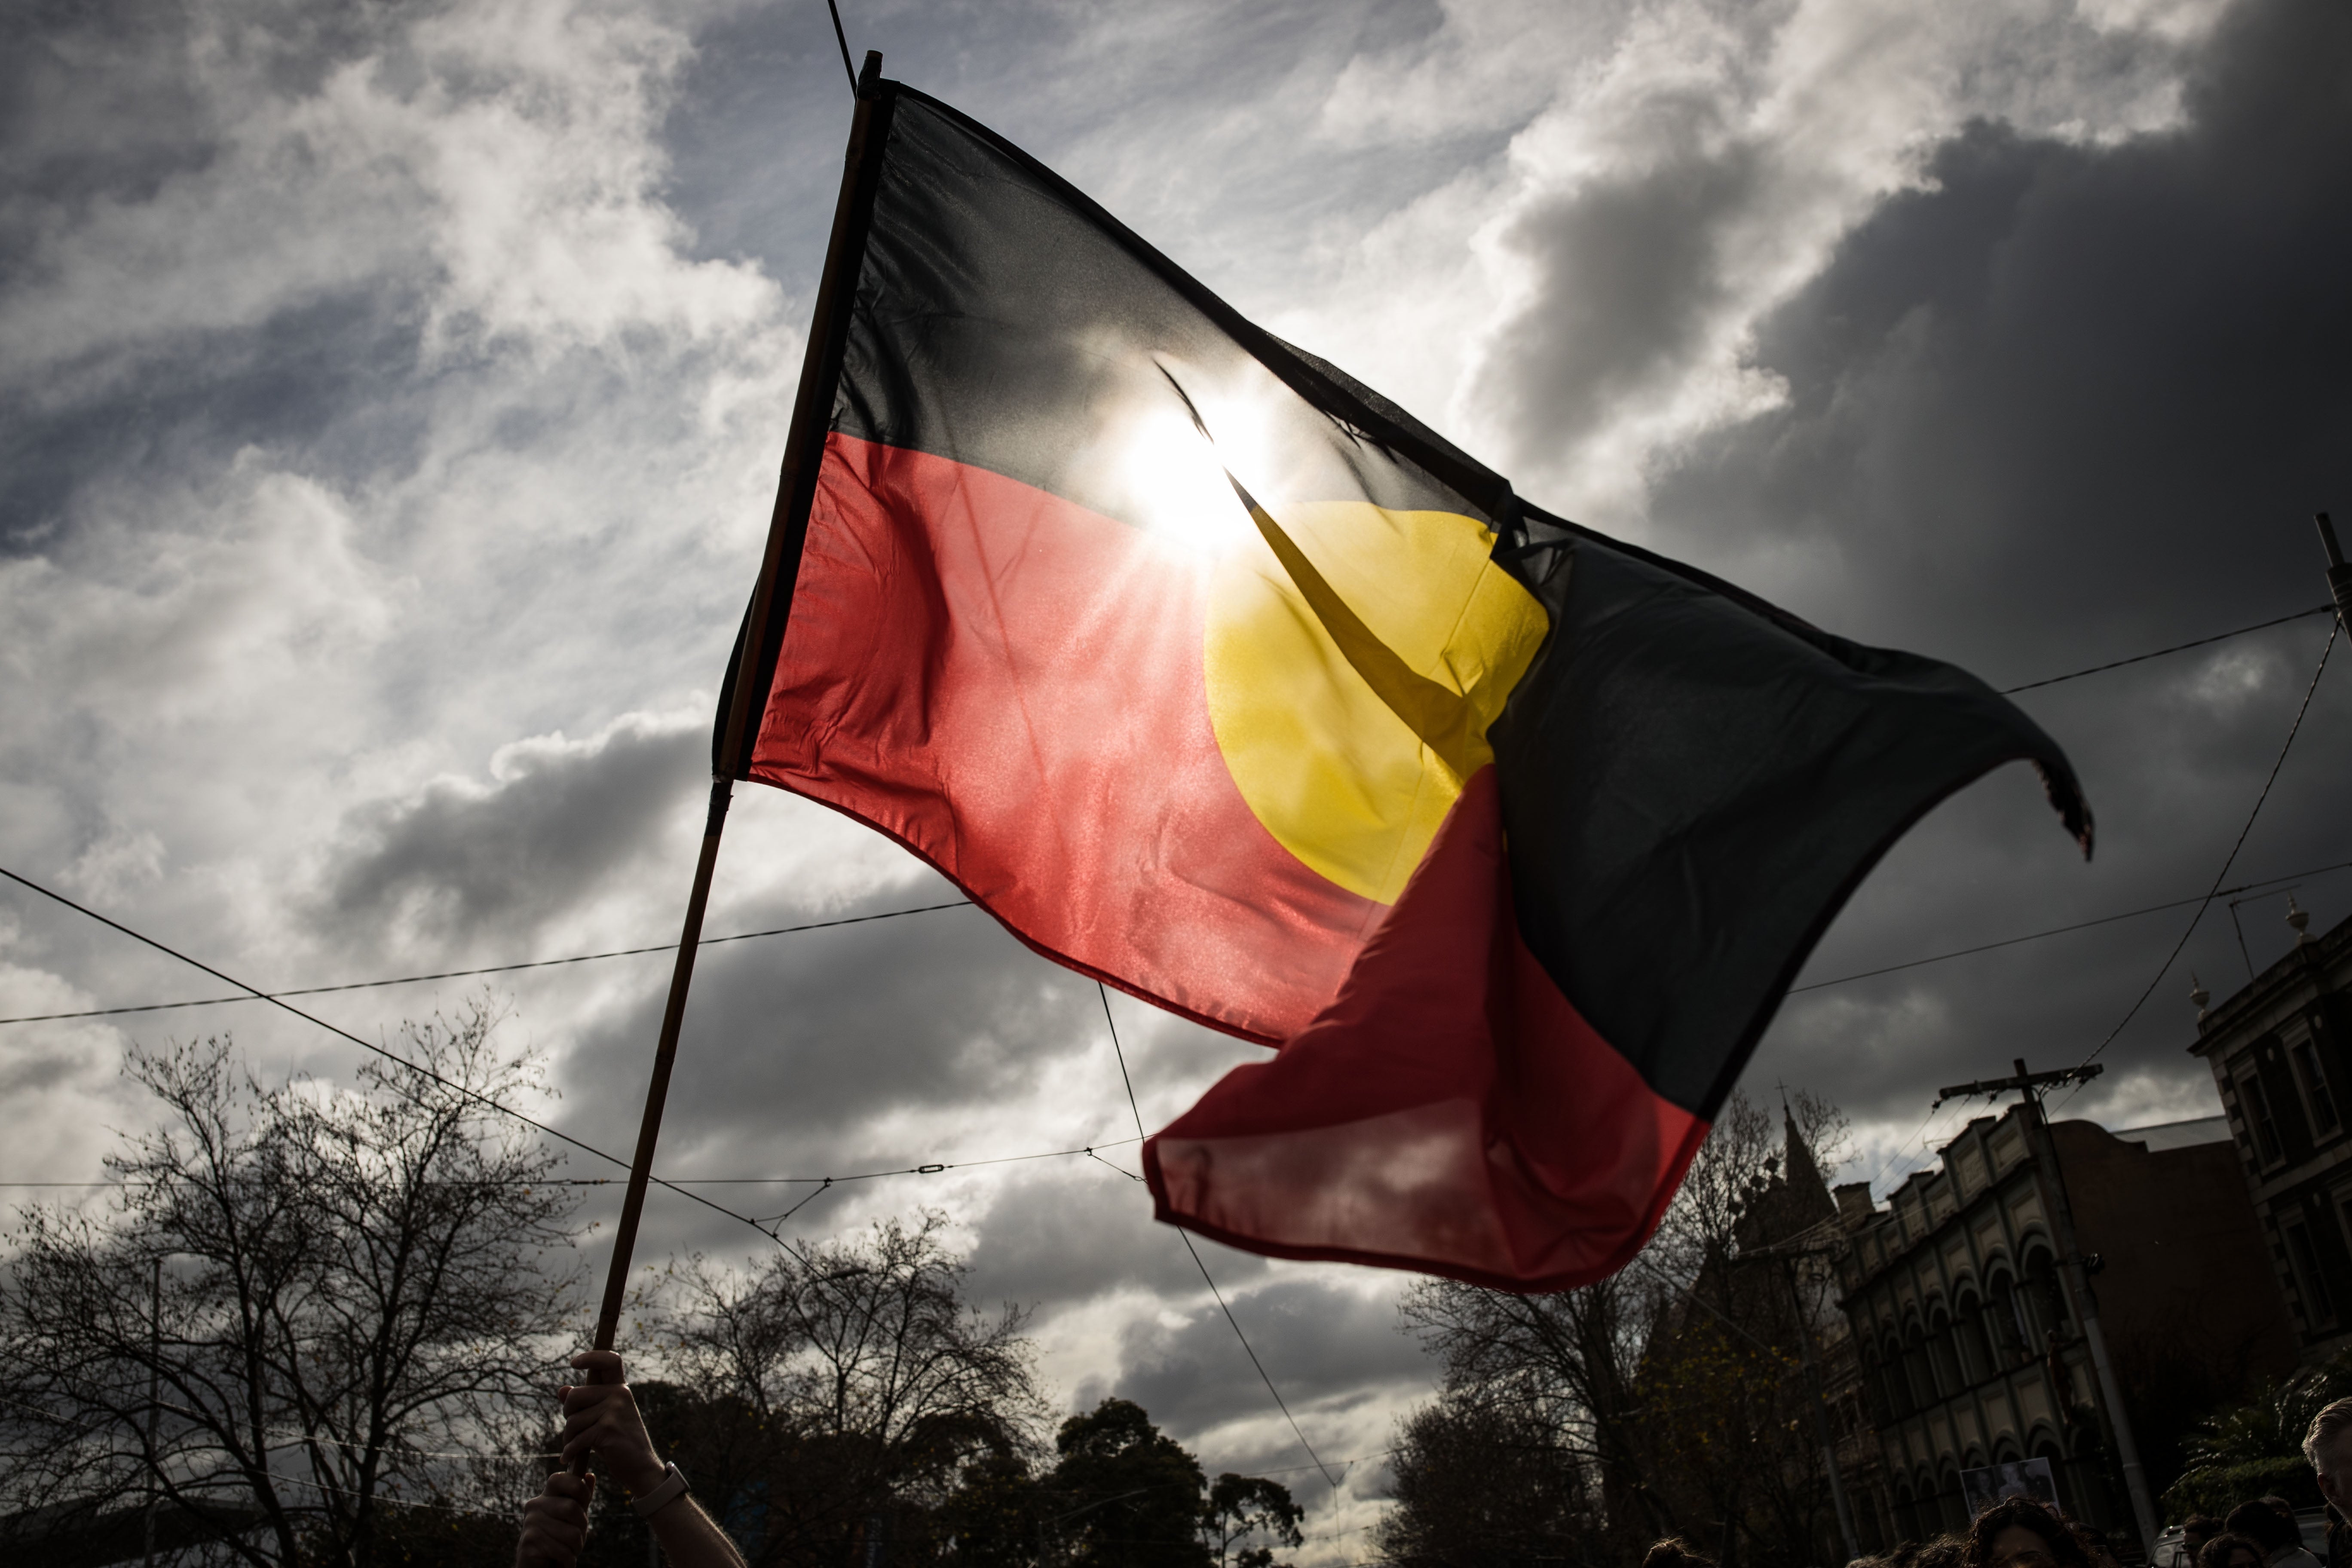 The Aboriginal flag is seen flying in Melbourne, Australia